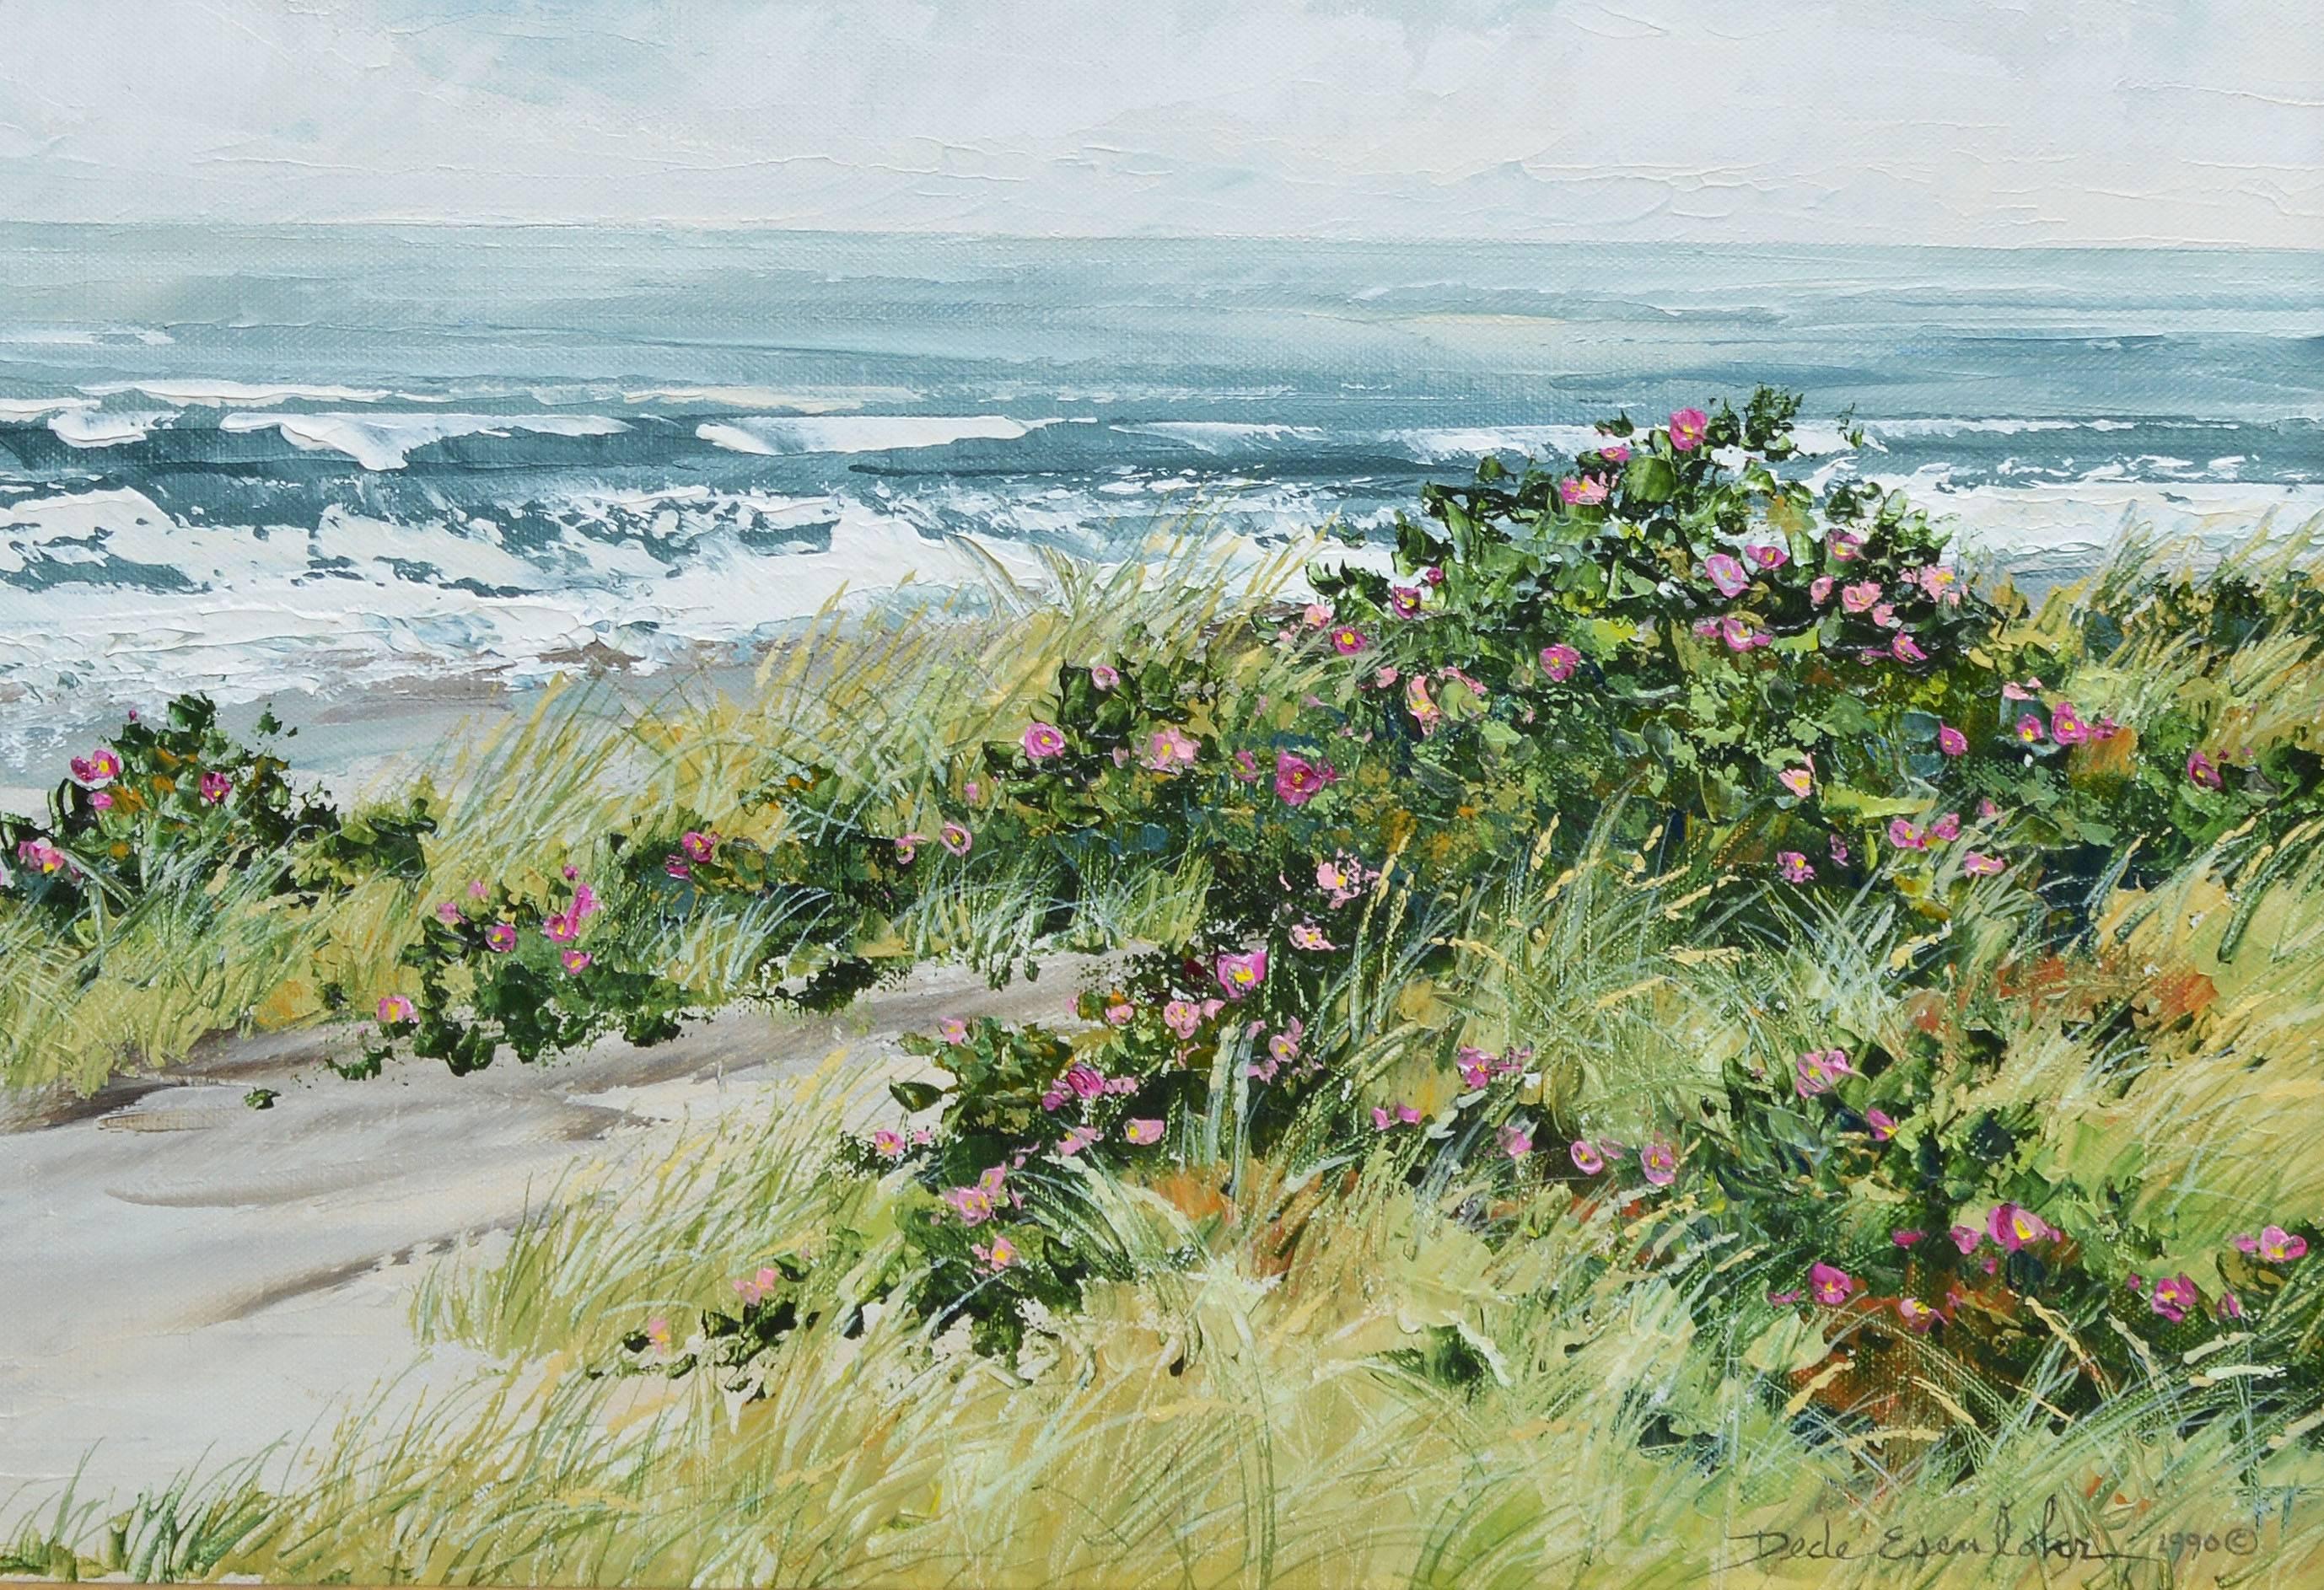 Modernist beach view with wild flowers by Dede Esenlohr.  Oil on canvas, circa 1990.  Signed lower right, "Dede Esenlohr".  Displayed in a giltwood frame.  Image size, 20"L x 16"H, overall 24"L x 20"H.